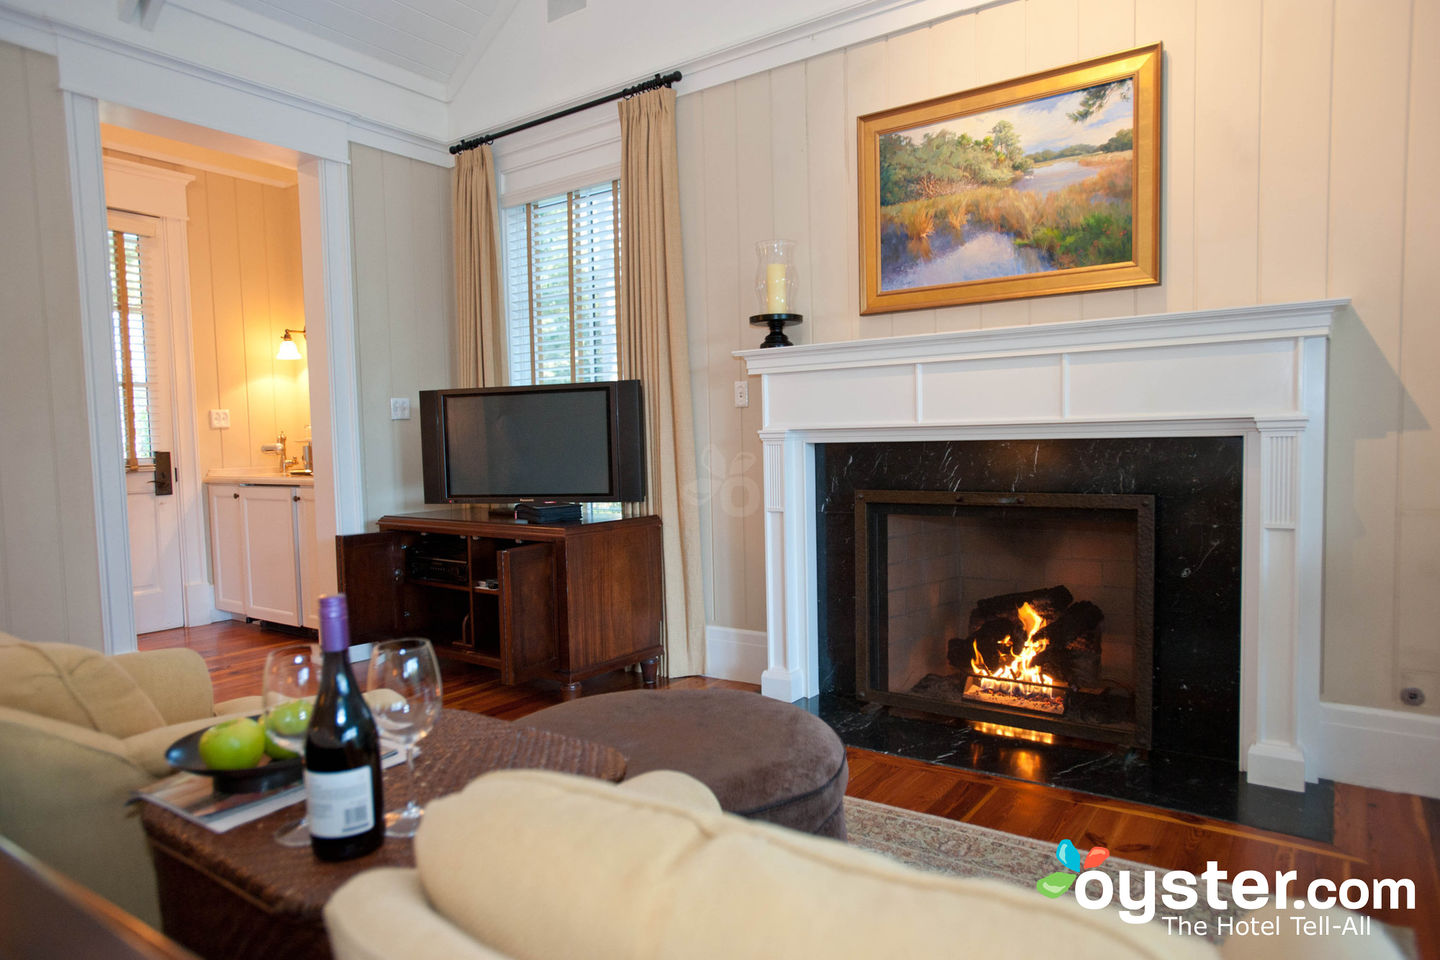 11 Cozy Hotels With Fireplaces In Every Room Oyster Com